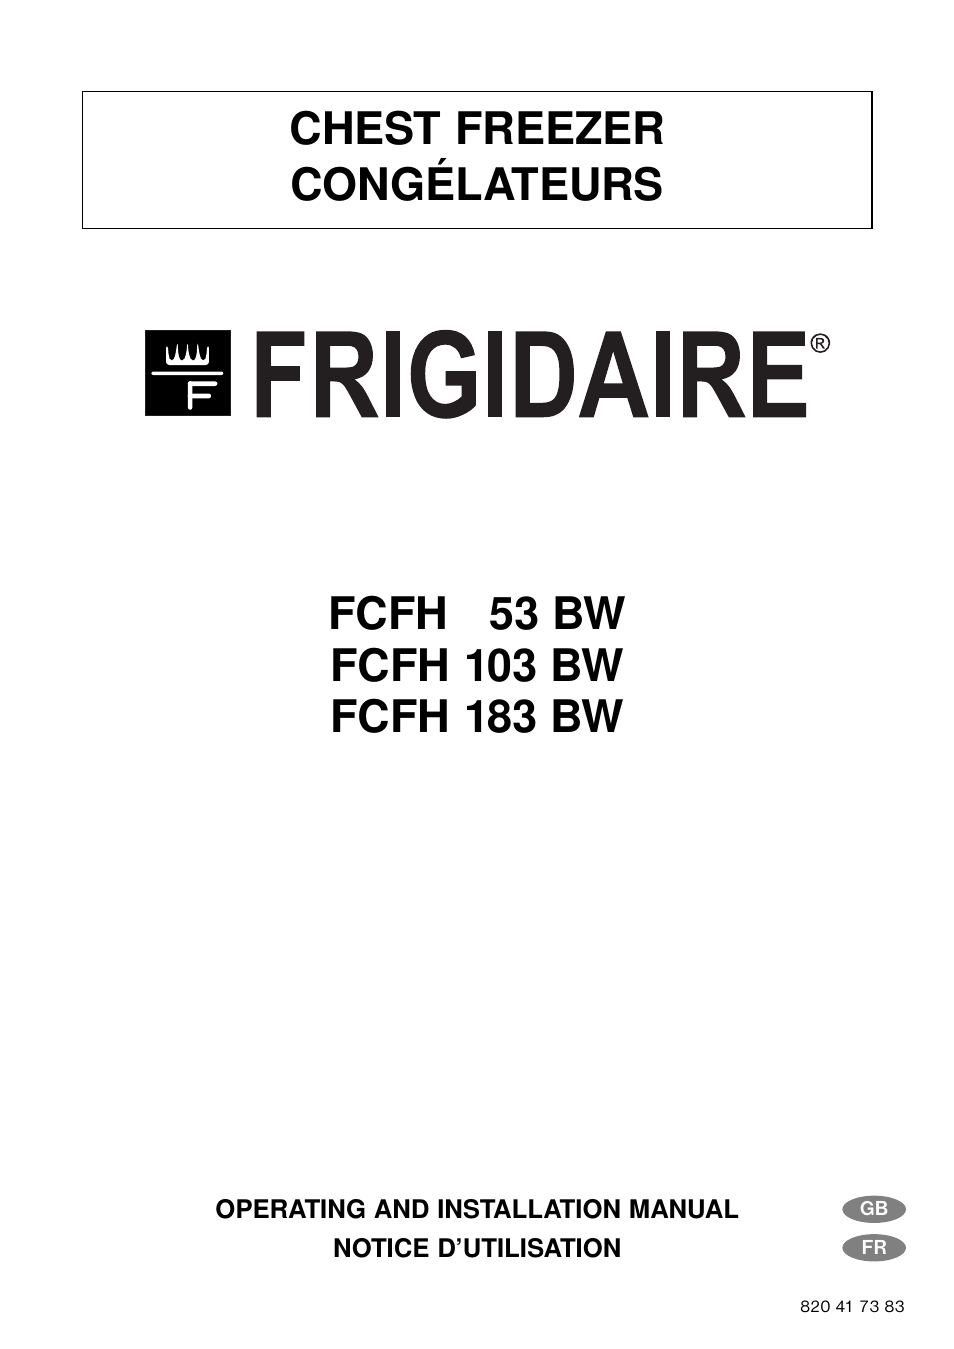 FRIGIDAIRE FCFH 183 BW User Manual | 11 pages